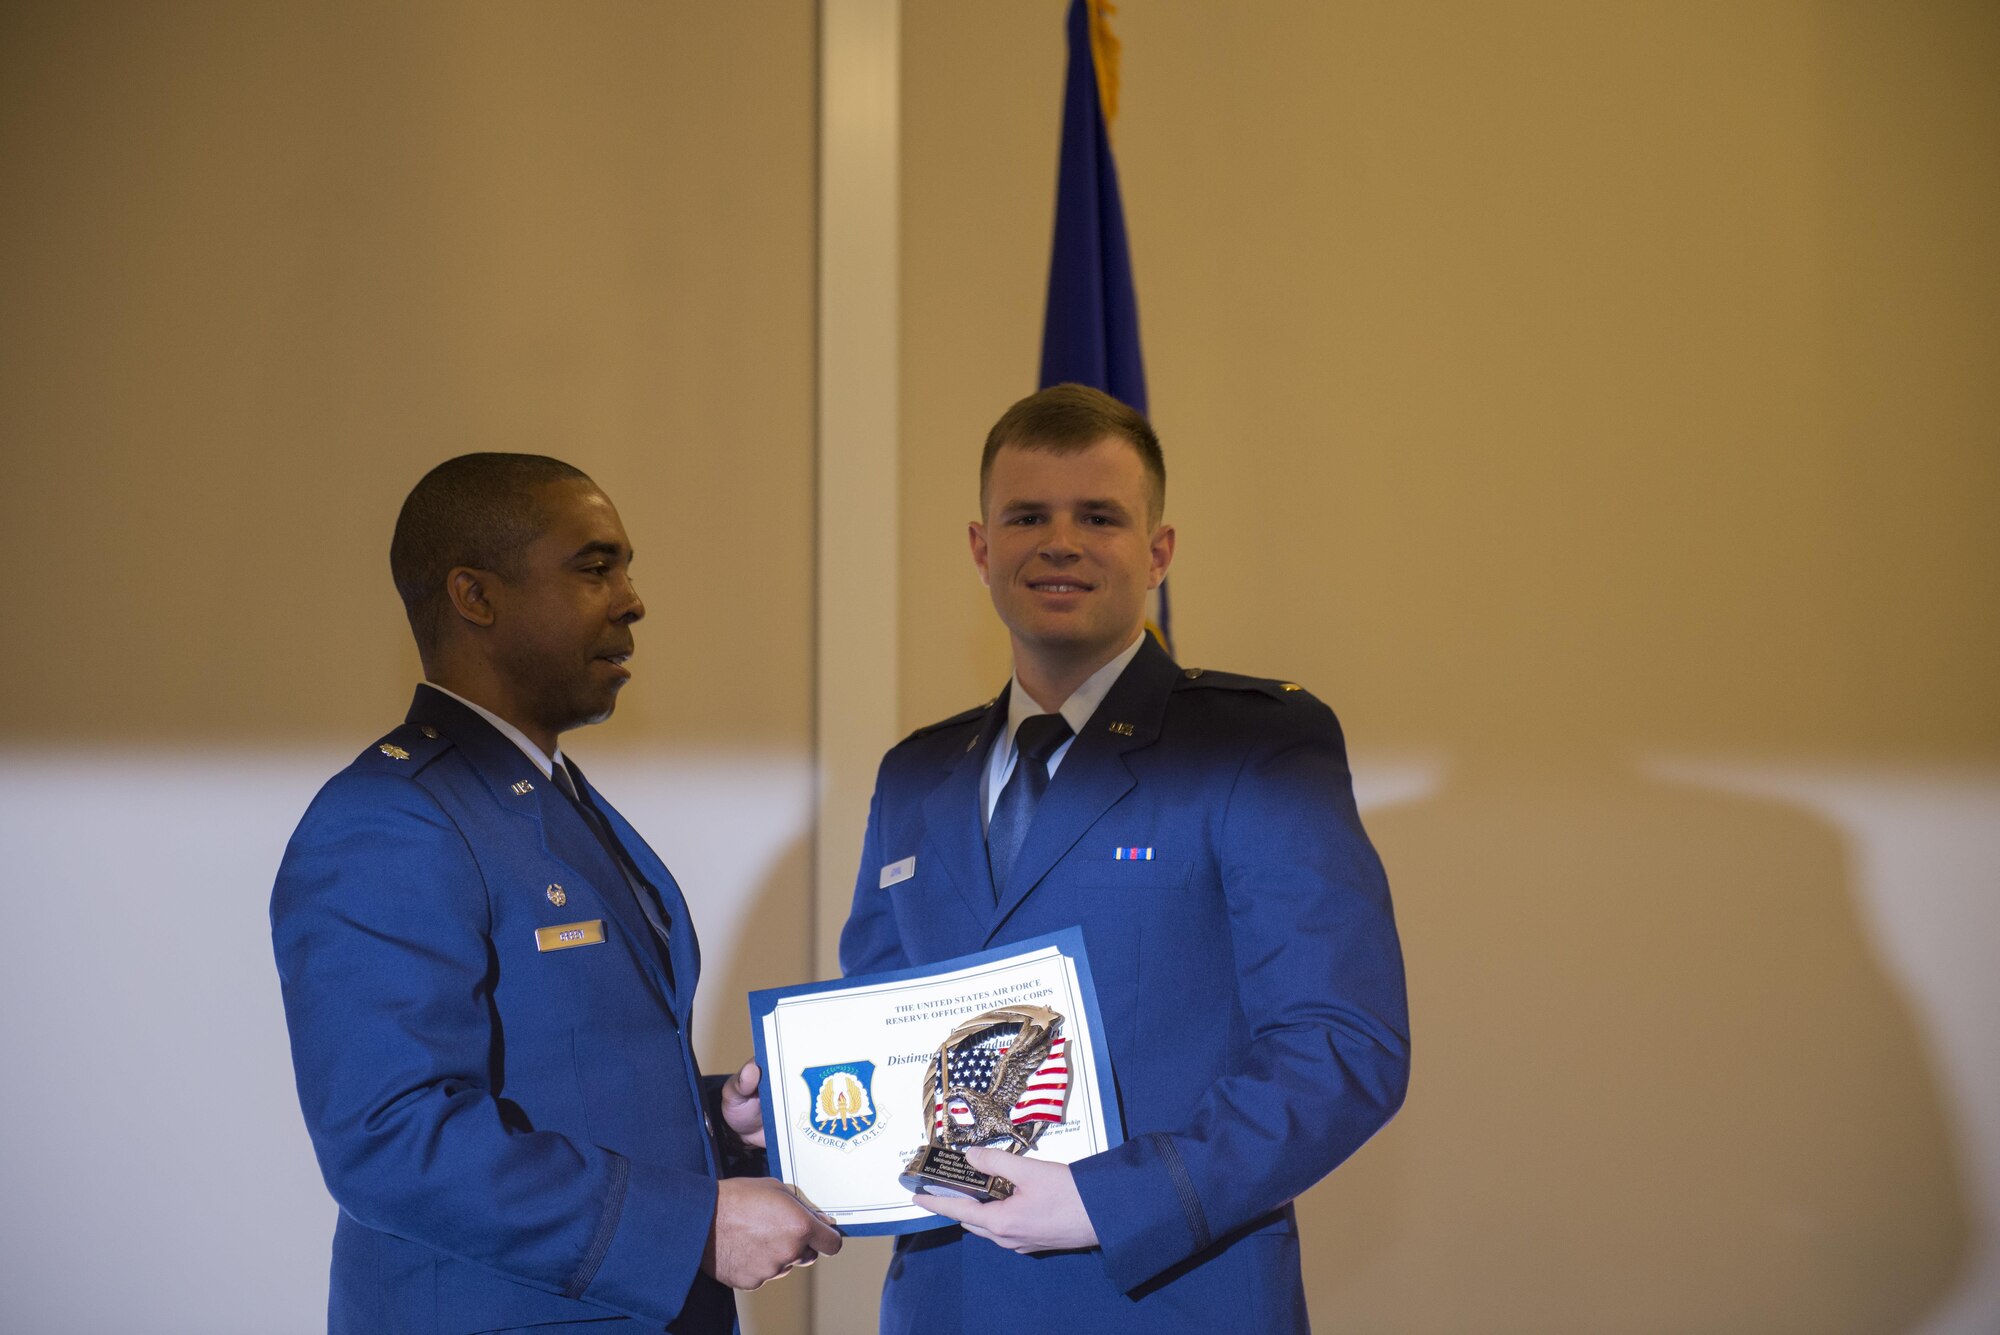 U.S. Air Force Lt. Col. Melvin Green, Detachment 172 commander, presents 2nd Lt. Bradley Joyal, former Air Force ROTC Det. 172 cadet wing commander, with the 2016 Det. 172 Distinguished Graduate award, May 7, 2016, in Valdosta, Ga. Joyal was awarded for his exceptional work as a cadet and student, and will embark on his active-duty Air Force journey to complete combat systems officer training at  Naval Air Station Pensacola, Fla. (U.S. Air Force photo by Airman 1st Class Greg Nash/Released) 